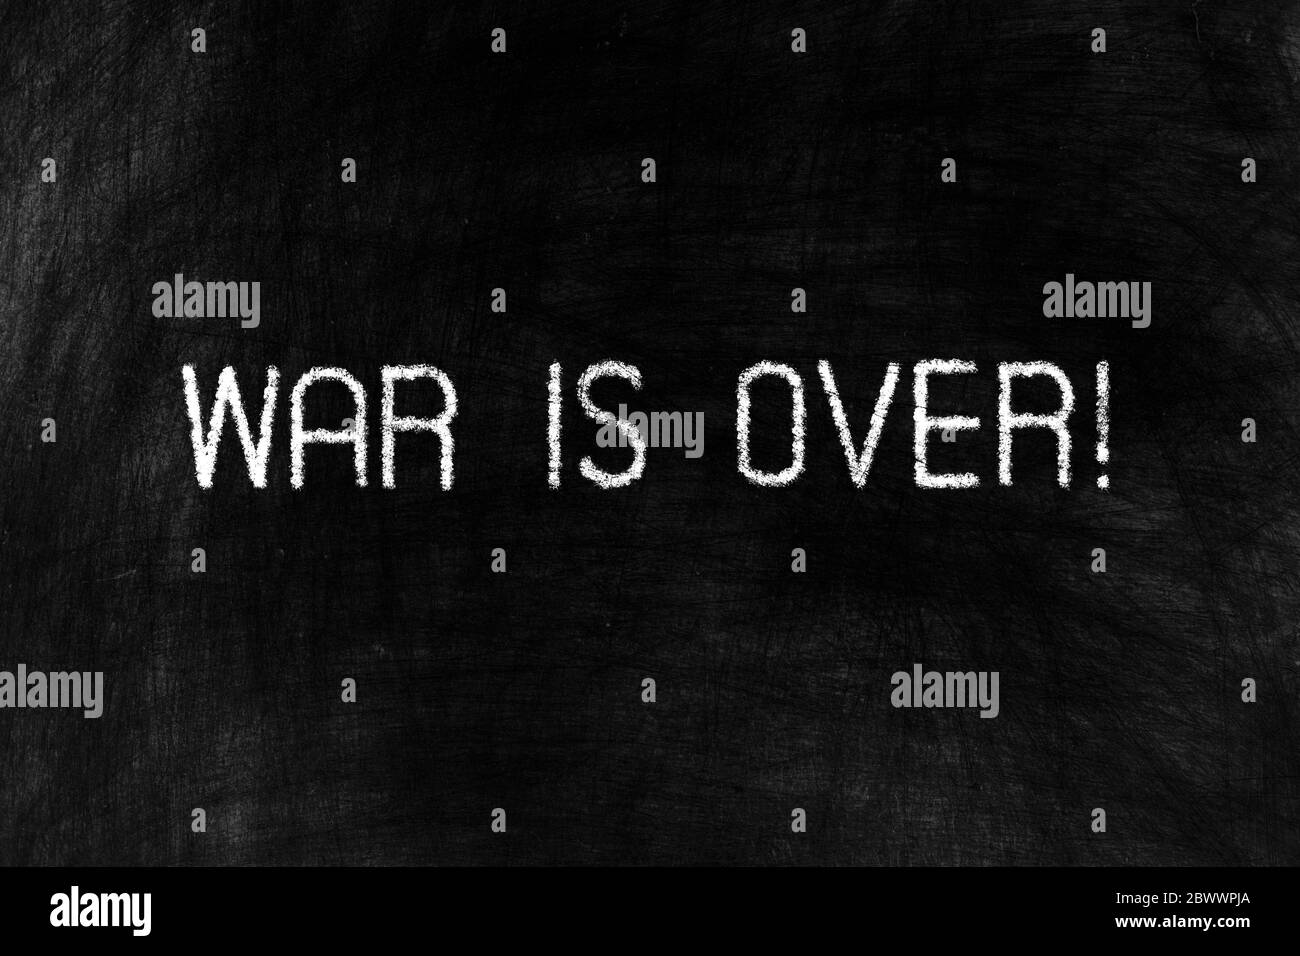 War is Over on Grunge Chalkboard Background. Stock Photo